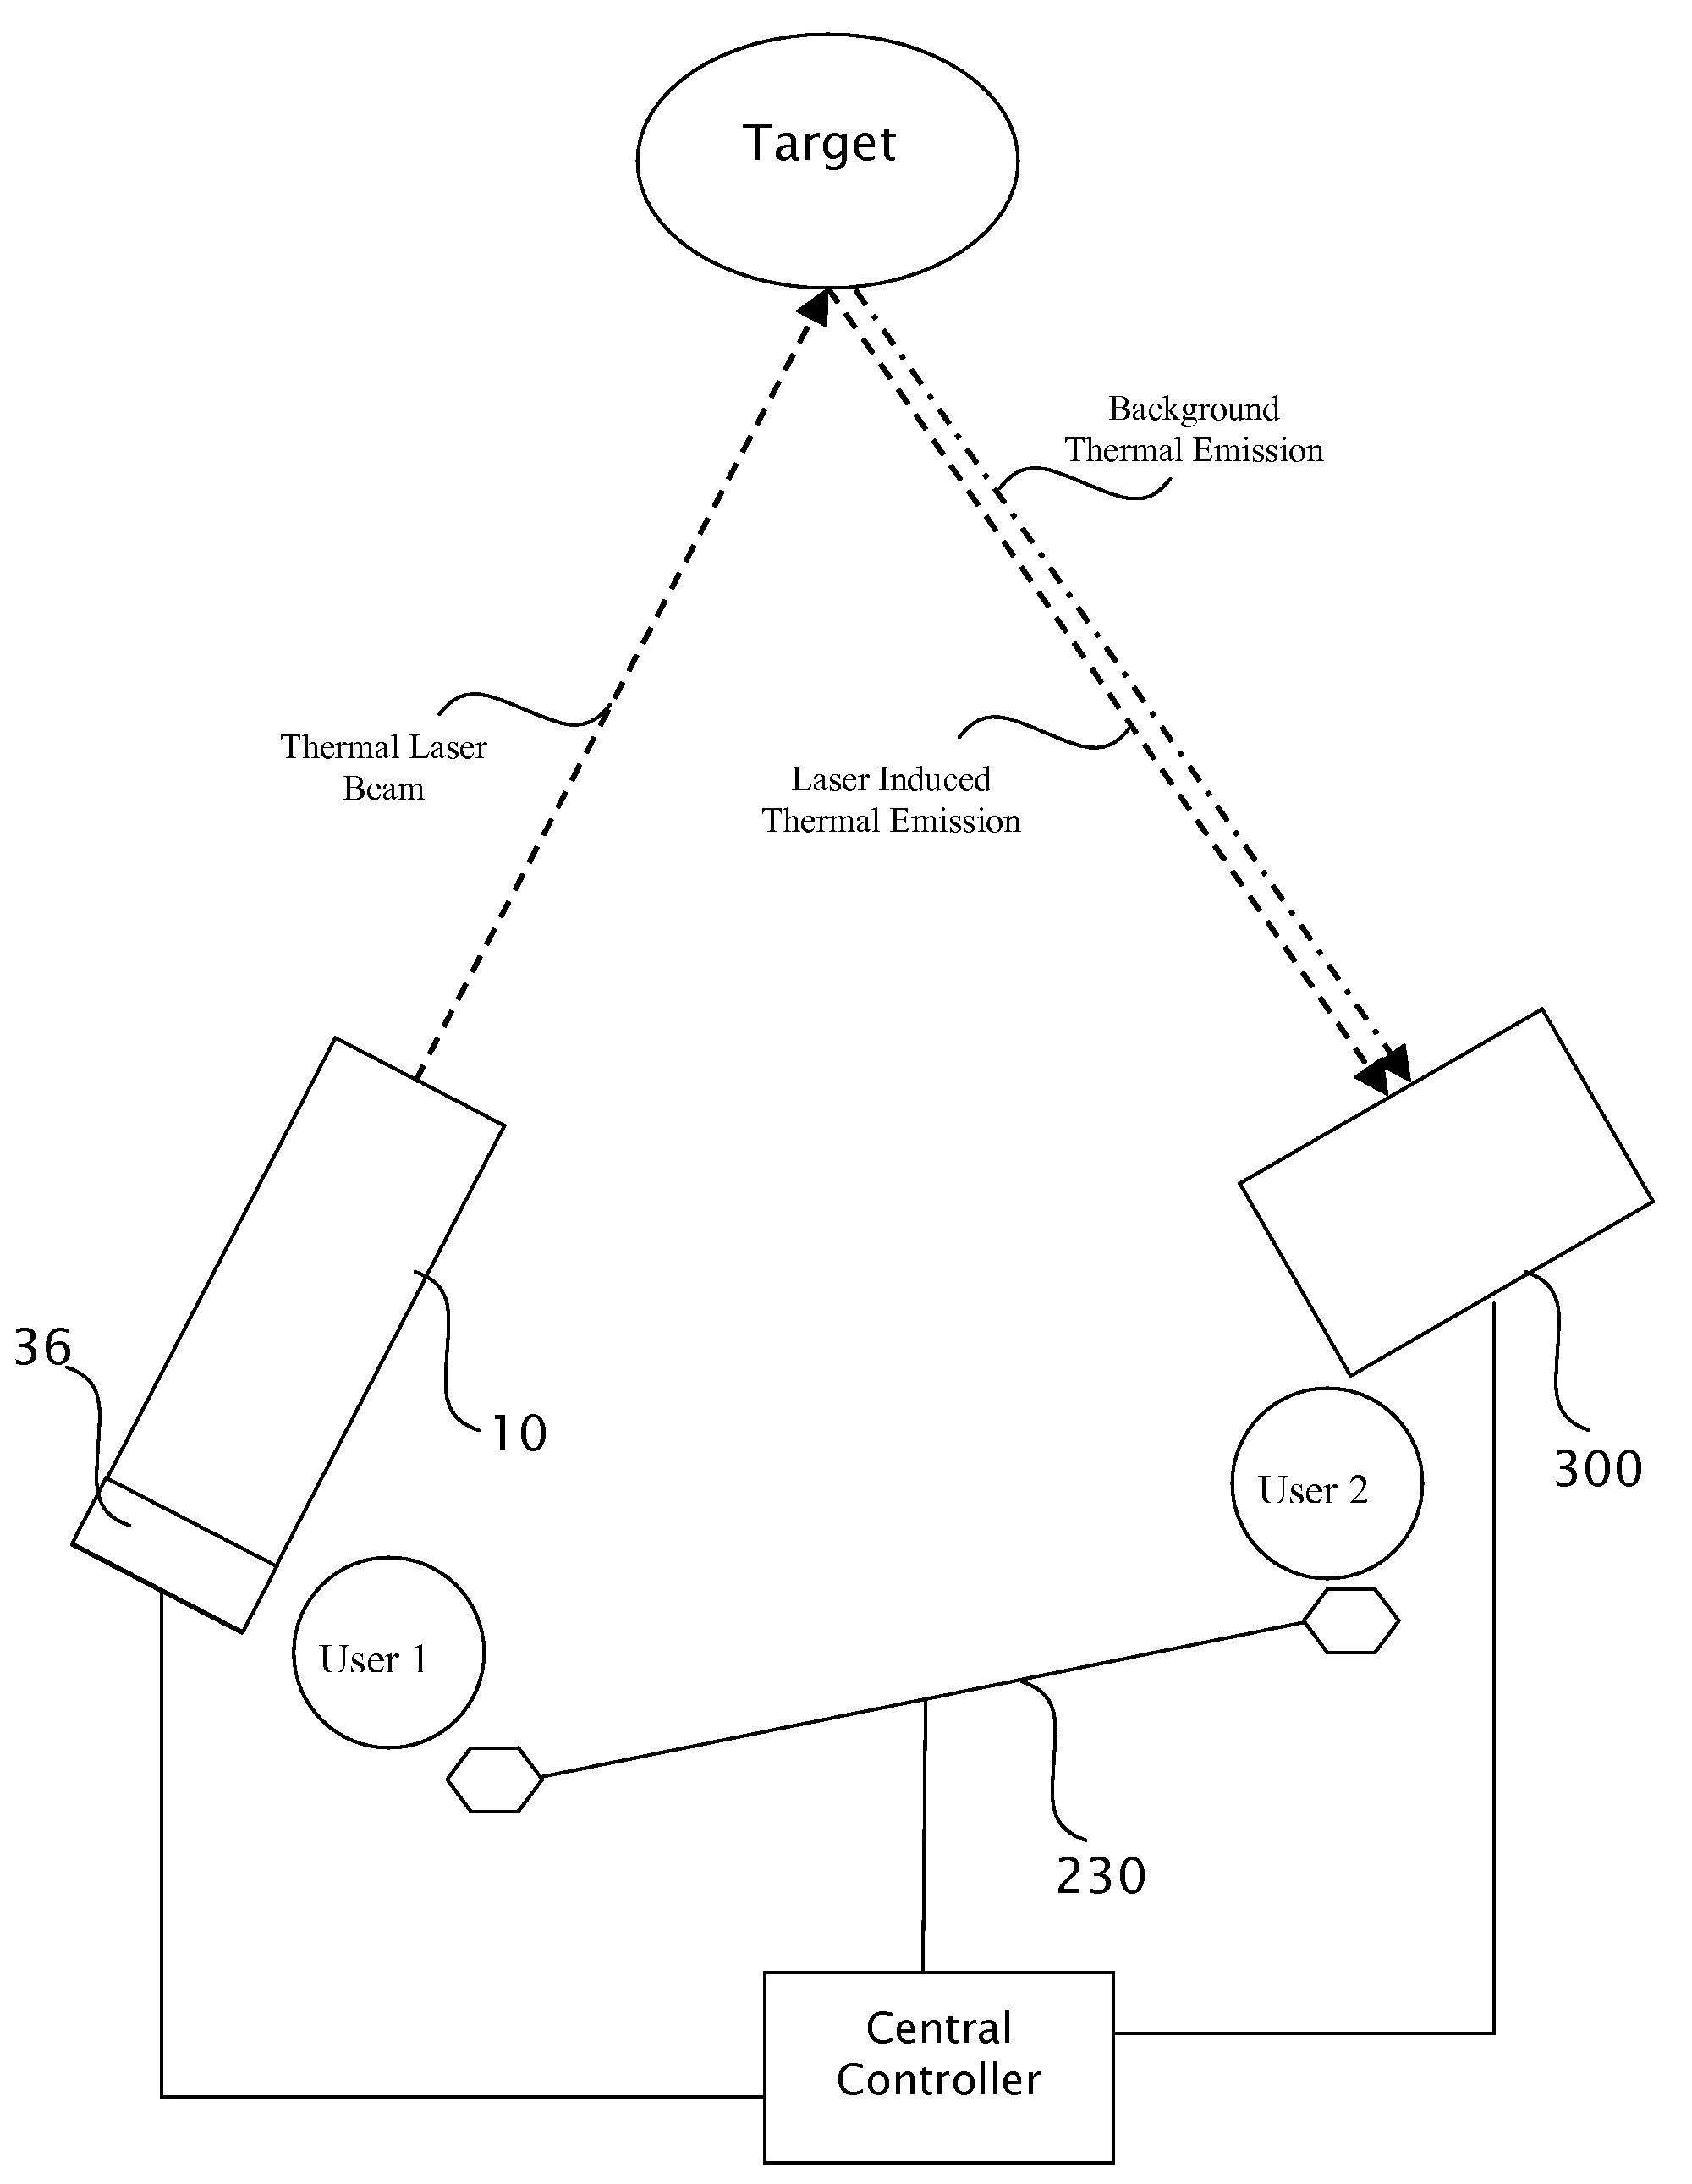 Target marking system having a gas laser assembly and a thermal imager